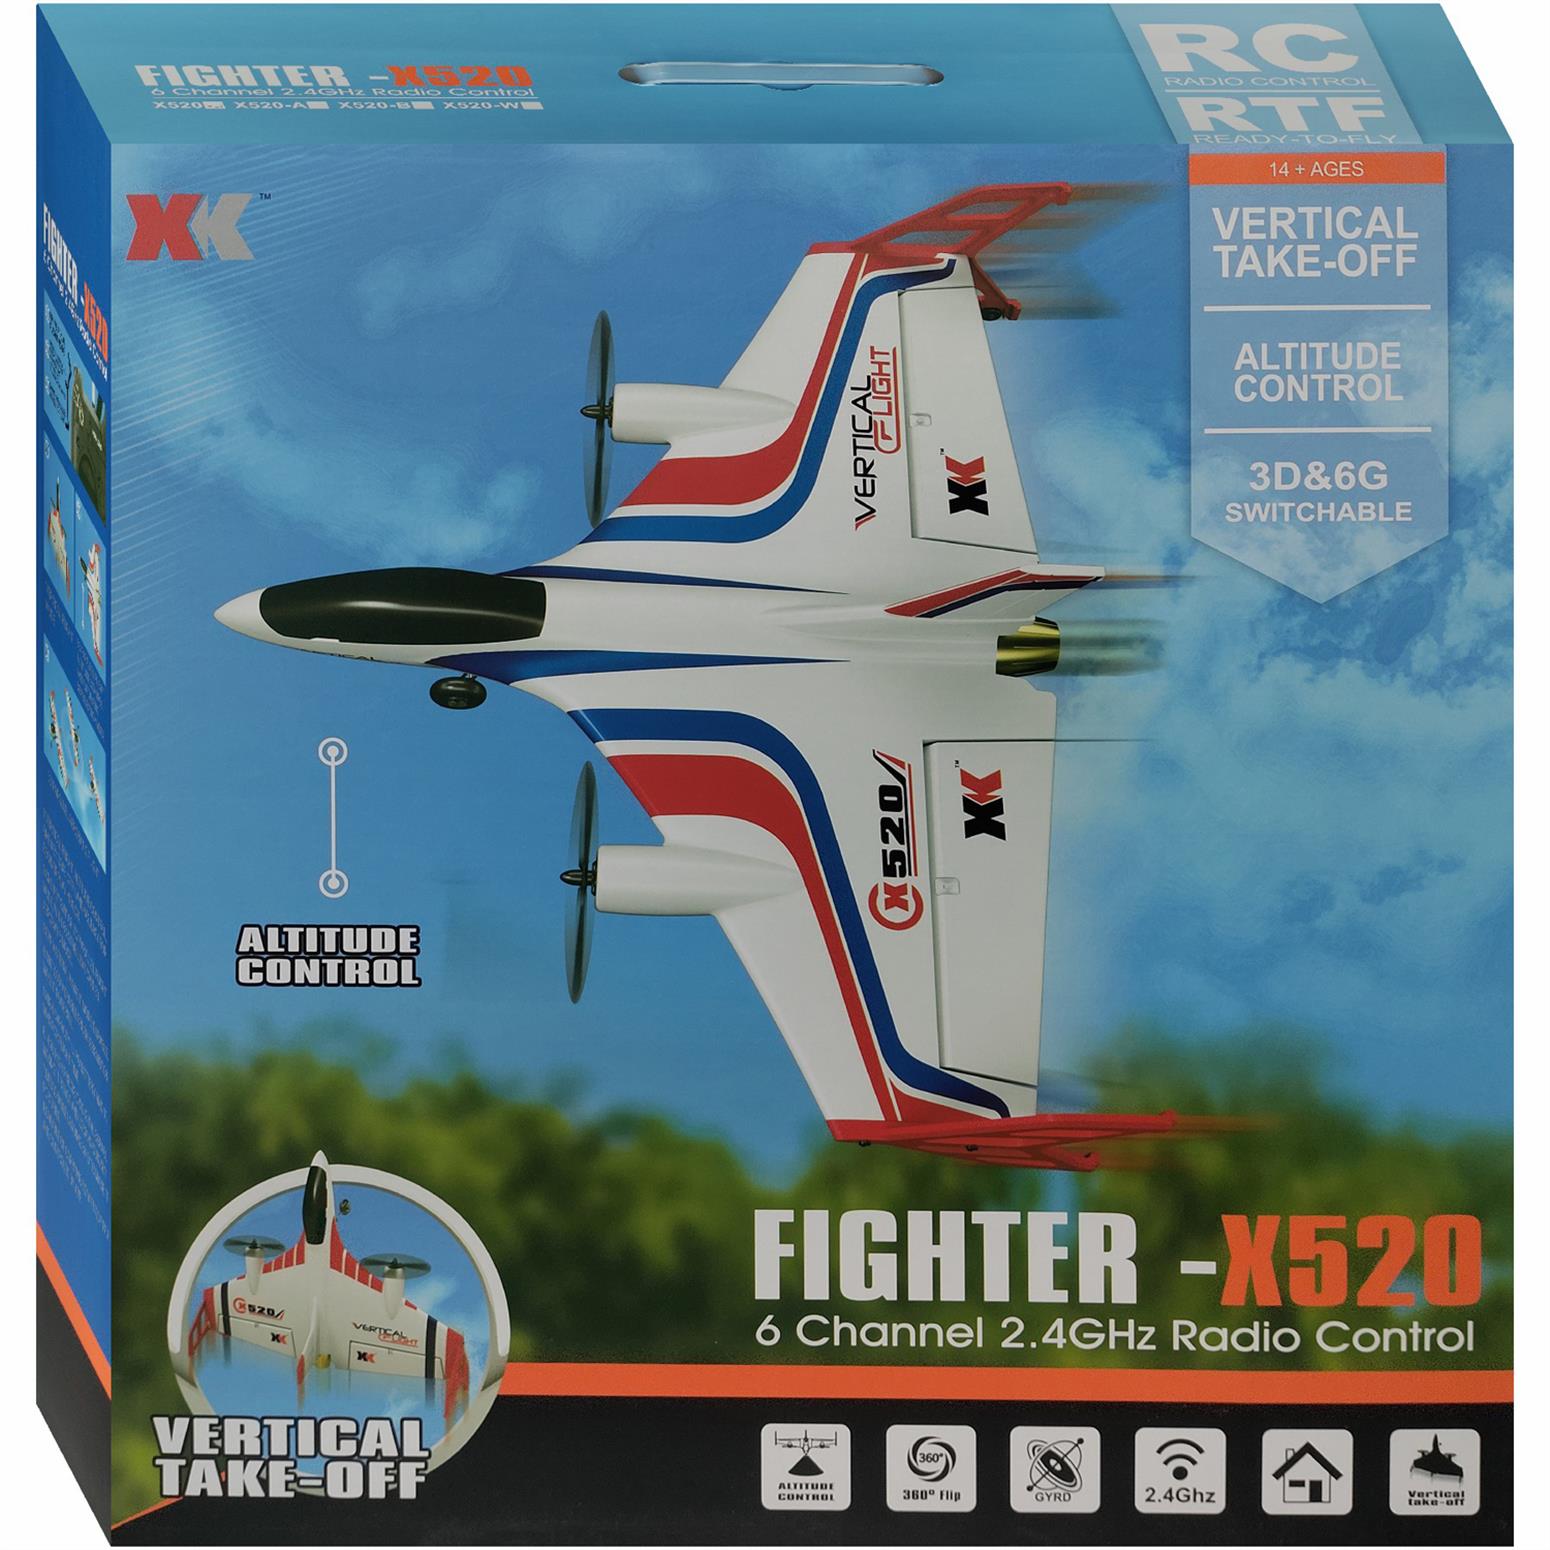 R/C FIGHTER 6 CHANNEL